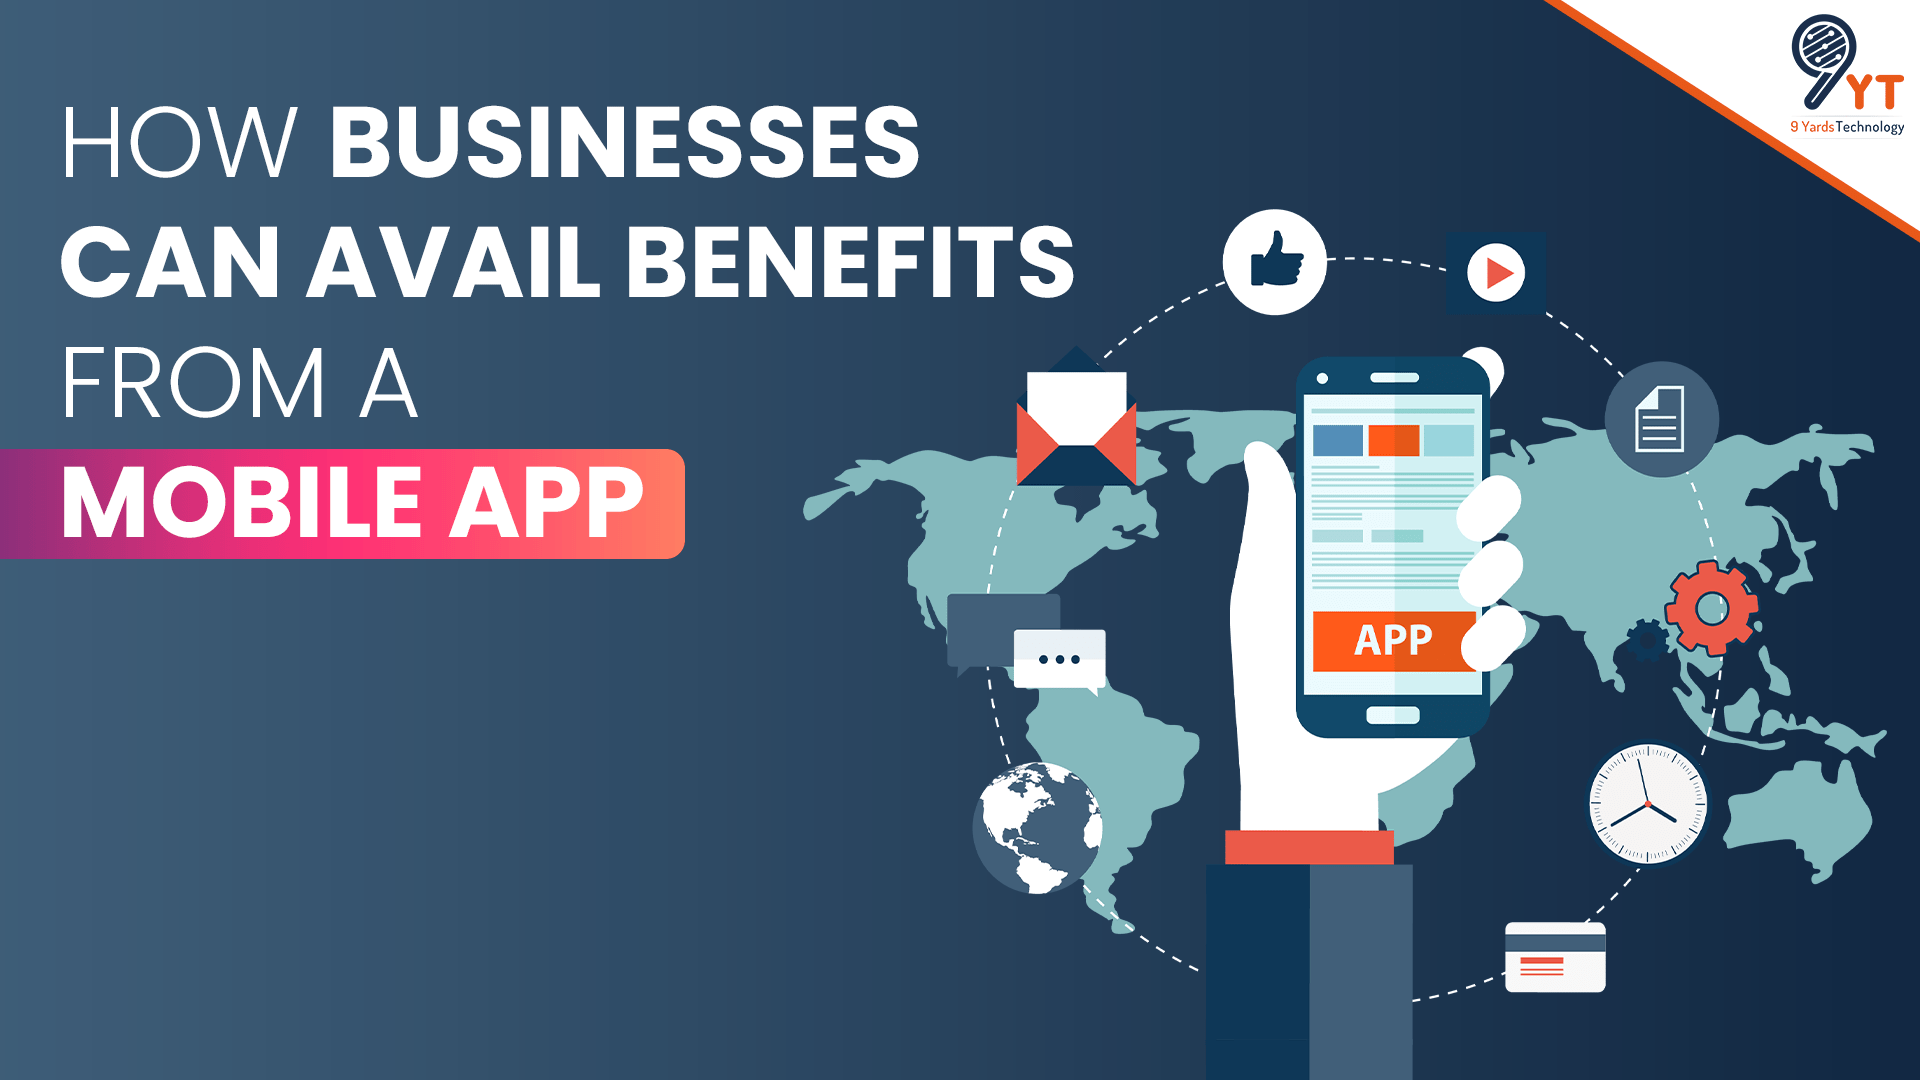 How Businesses Can Avail Benefits from a Mobile App?